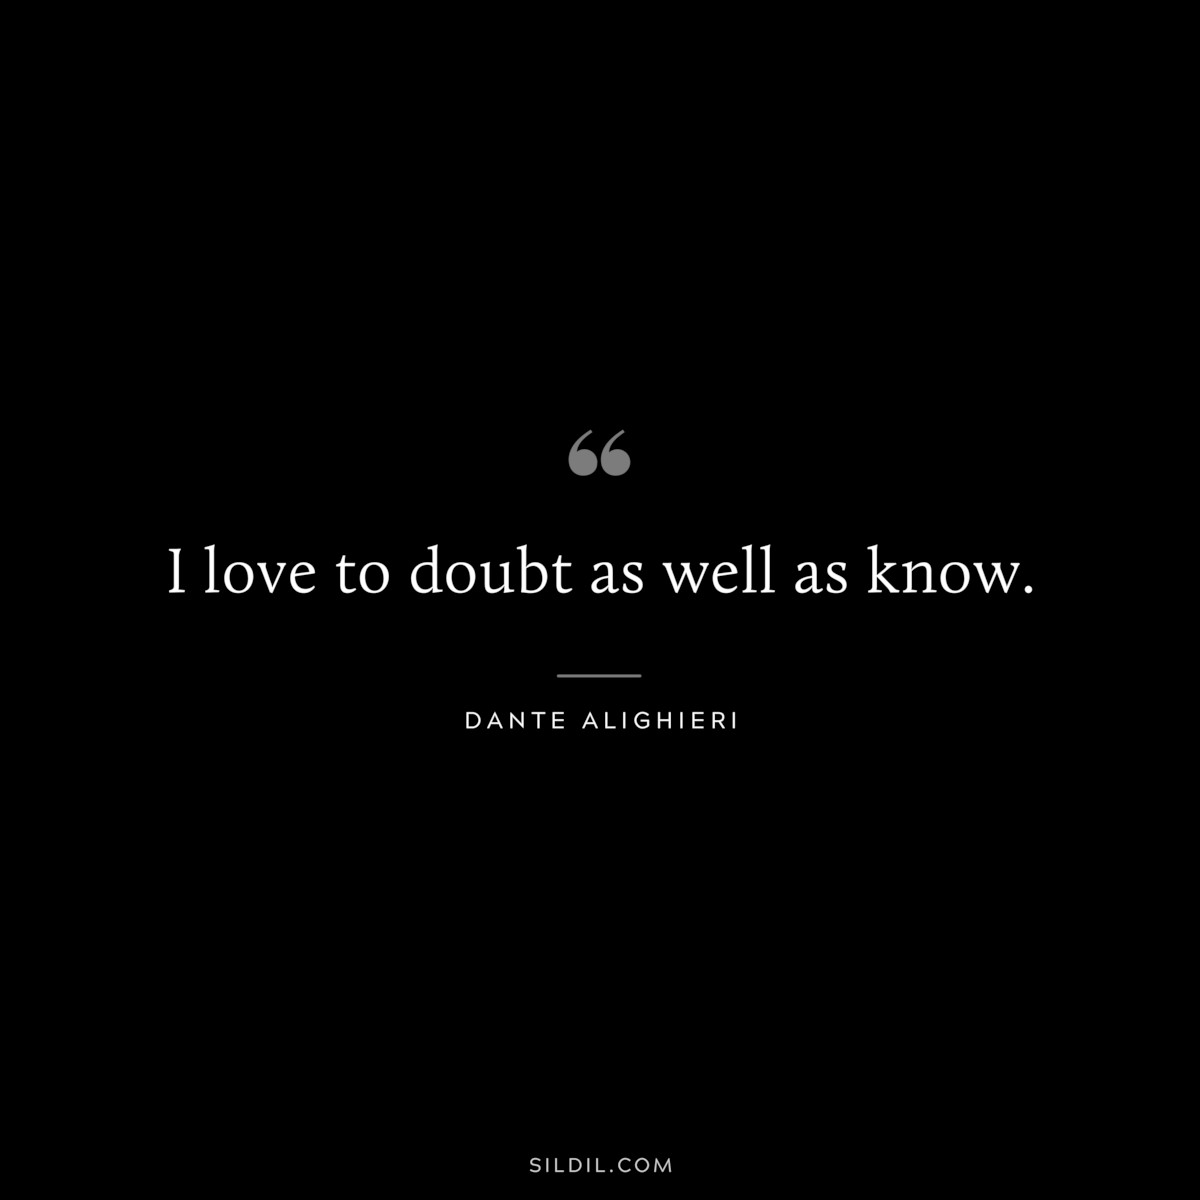 I love to doubt as well as know. ― Dante Alighieri